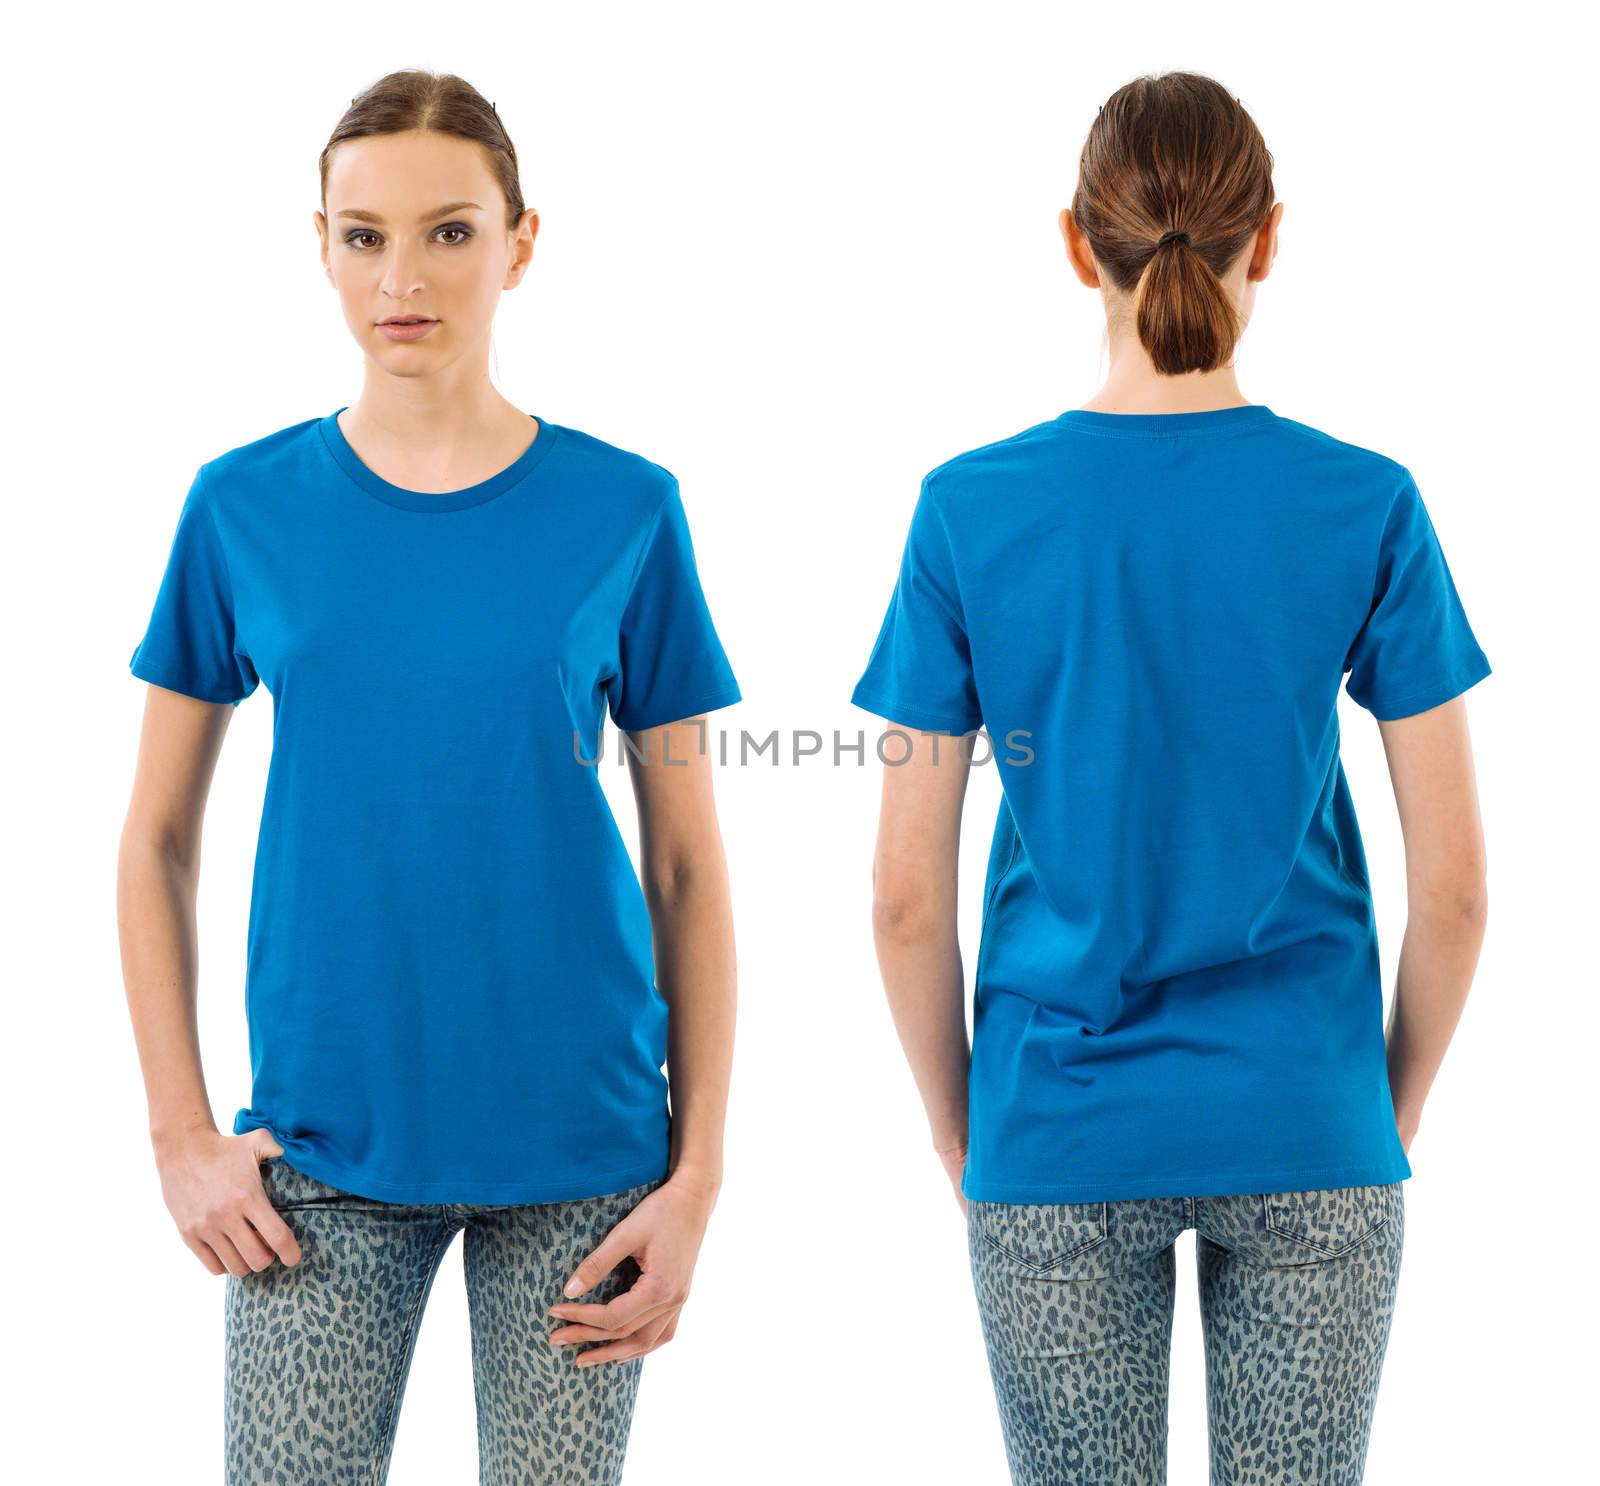 Serious woman with blank blue shirt by sumners